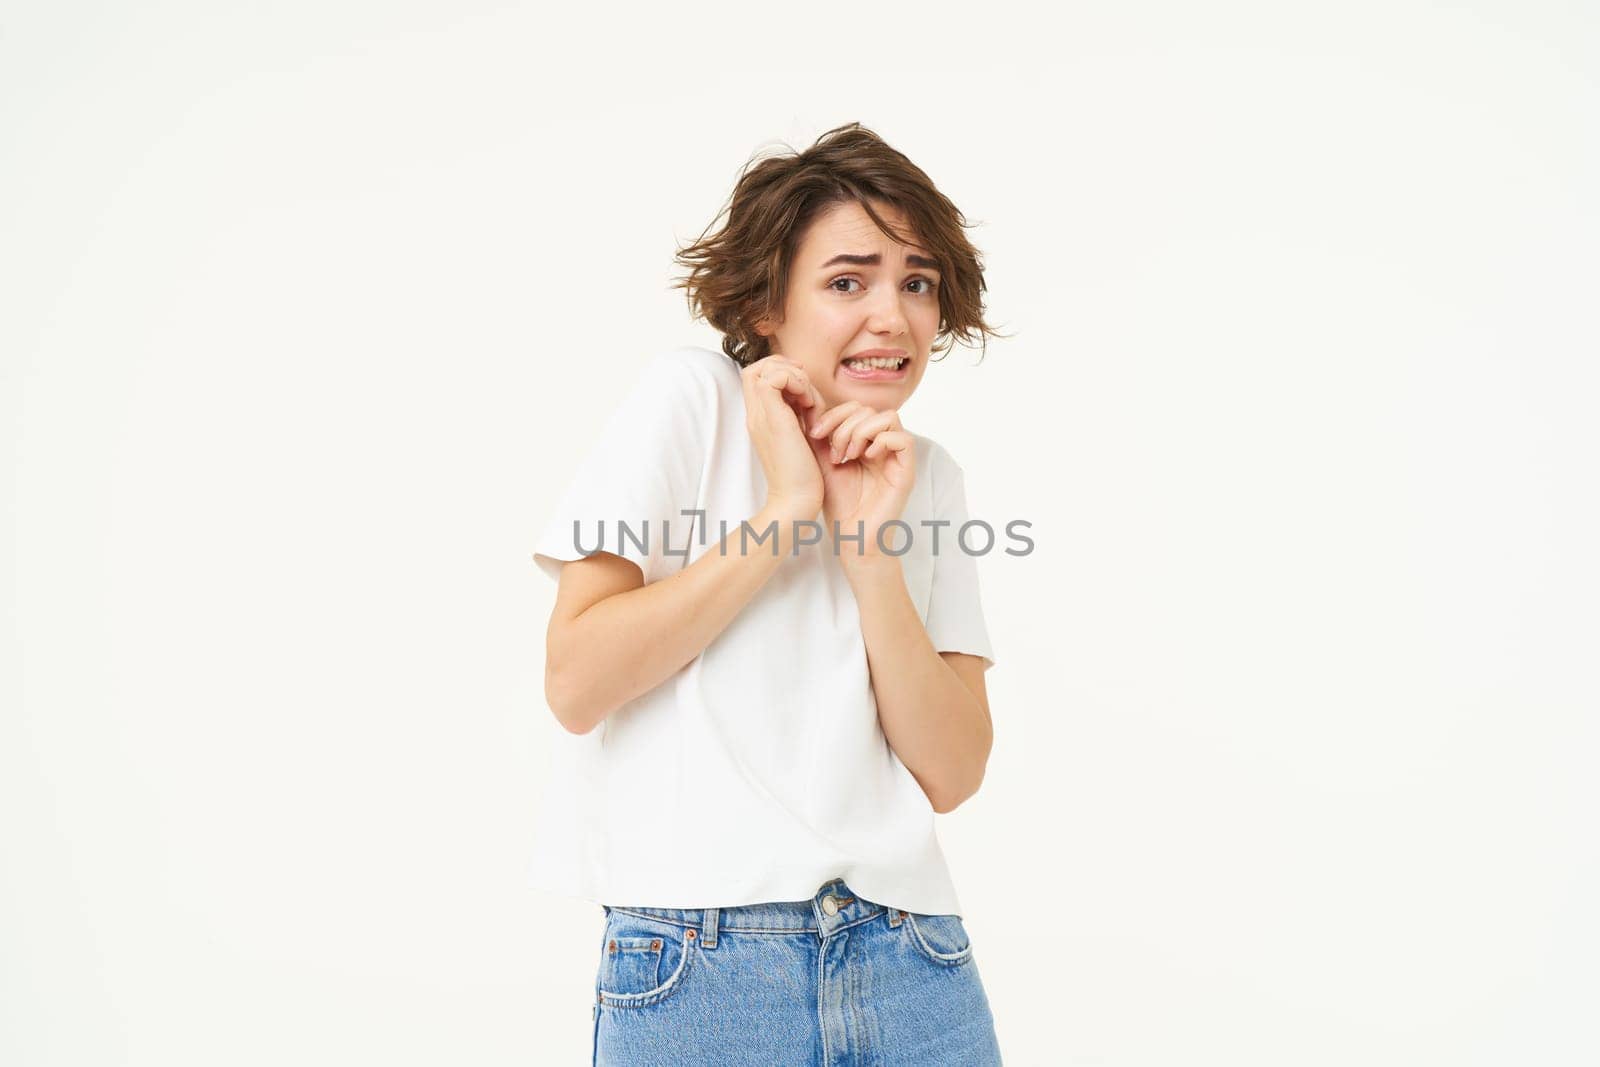 Image of girl jumps from fear, scared, looking frightened, standing against white studio background. Copy space